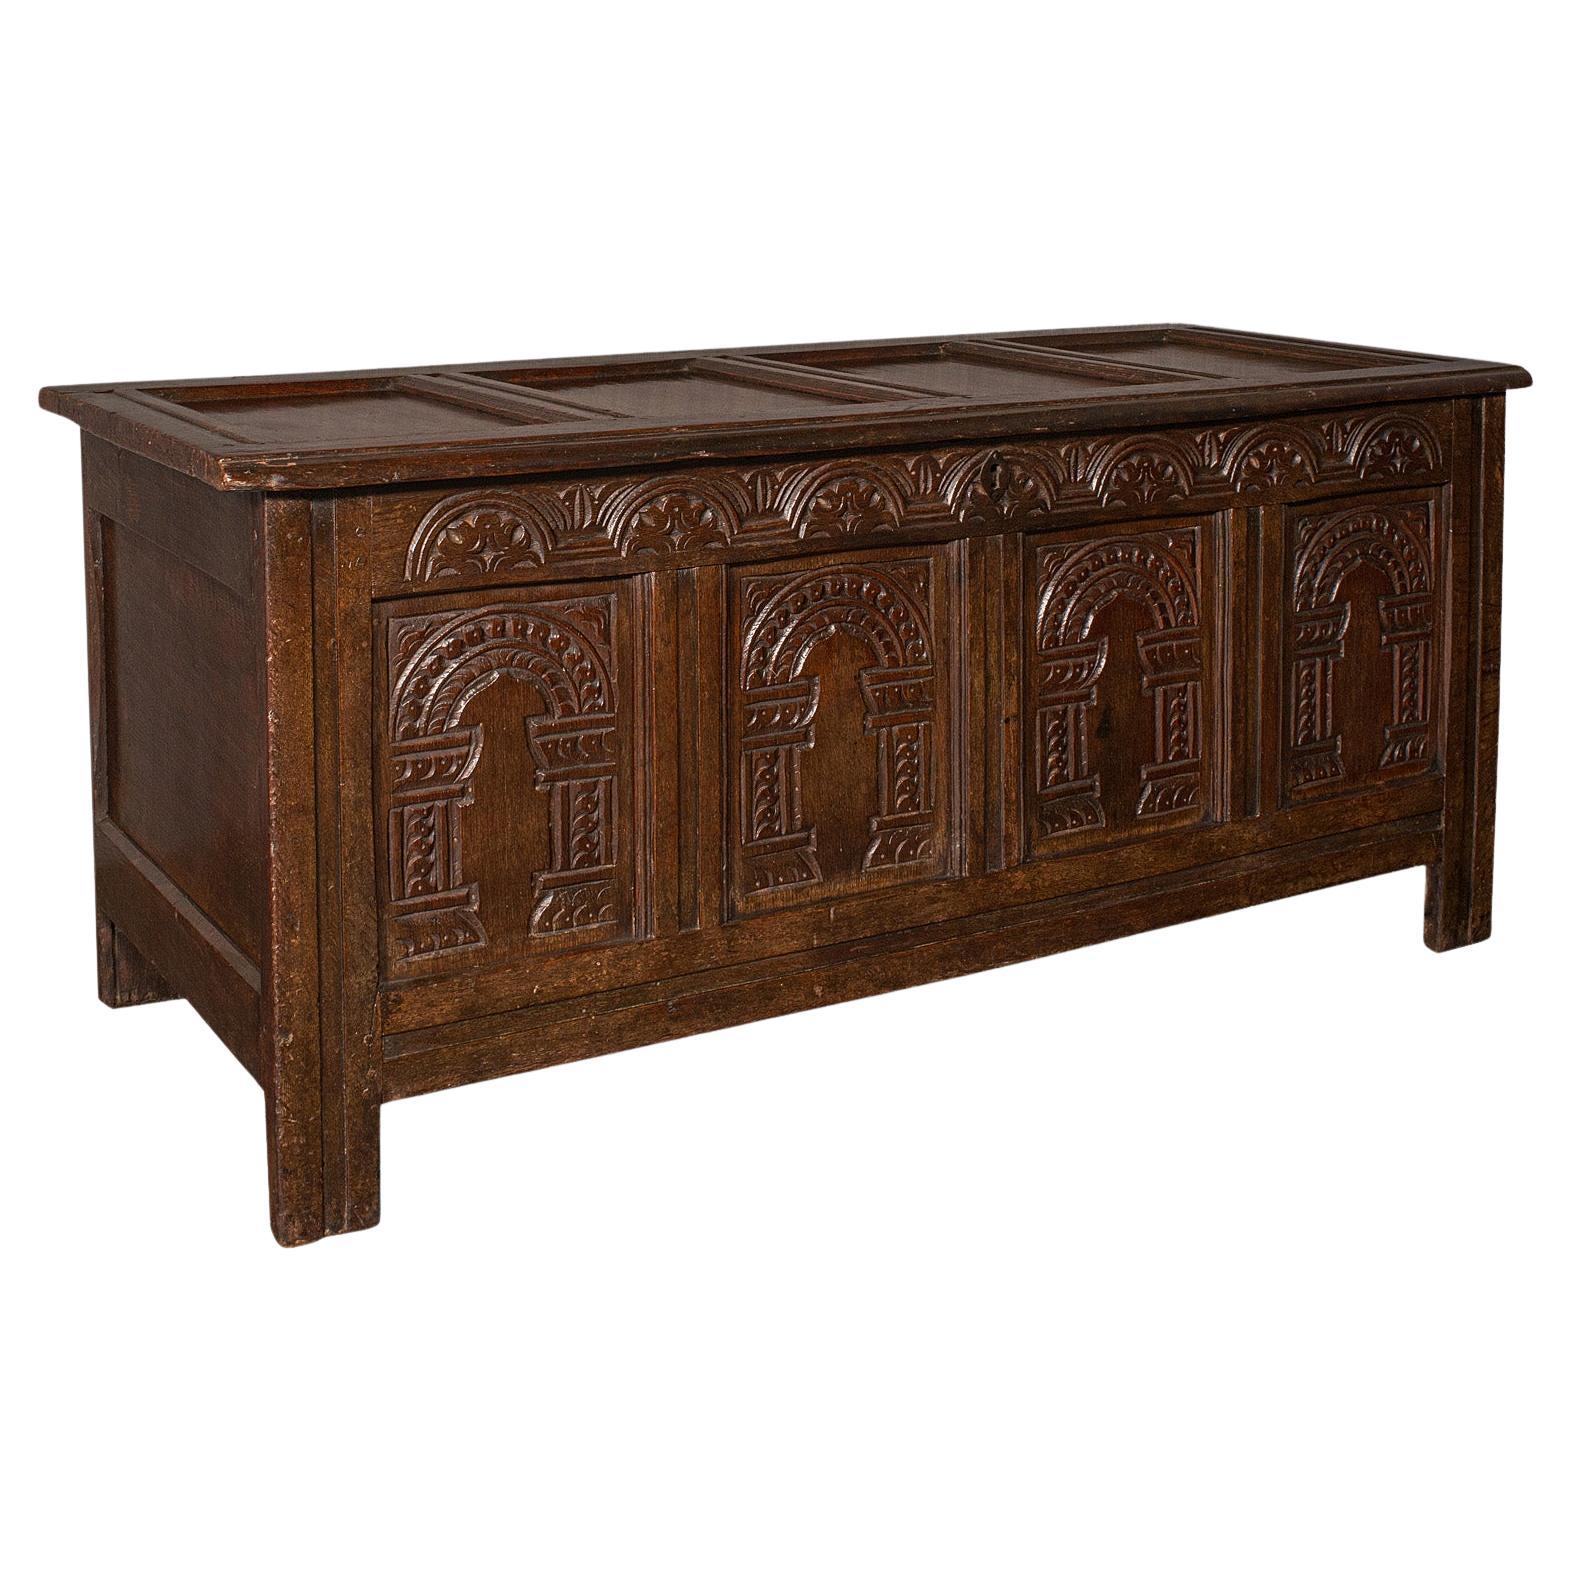 Large Antique Coffer, English, Oak, Carved Trunk, Window Seat, William III, 1700 For Sale